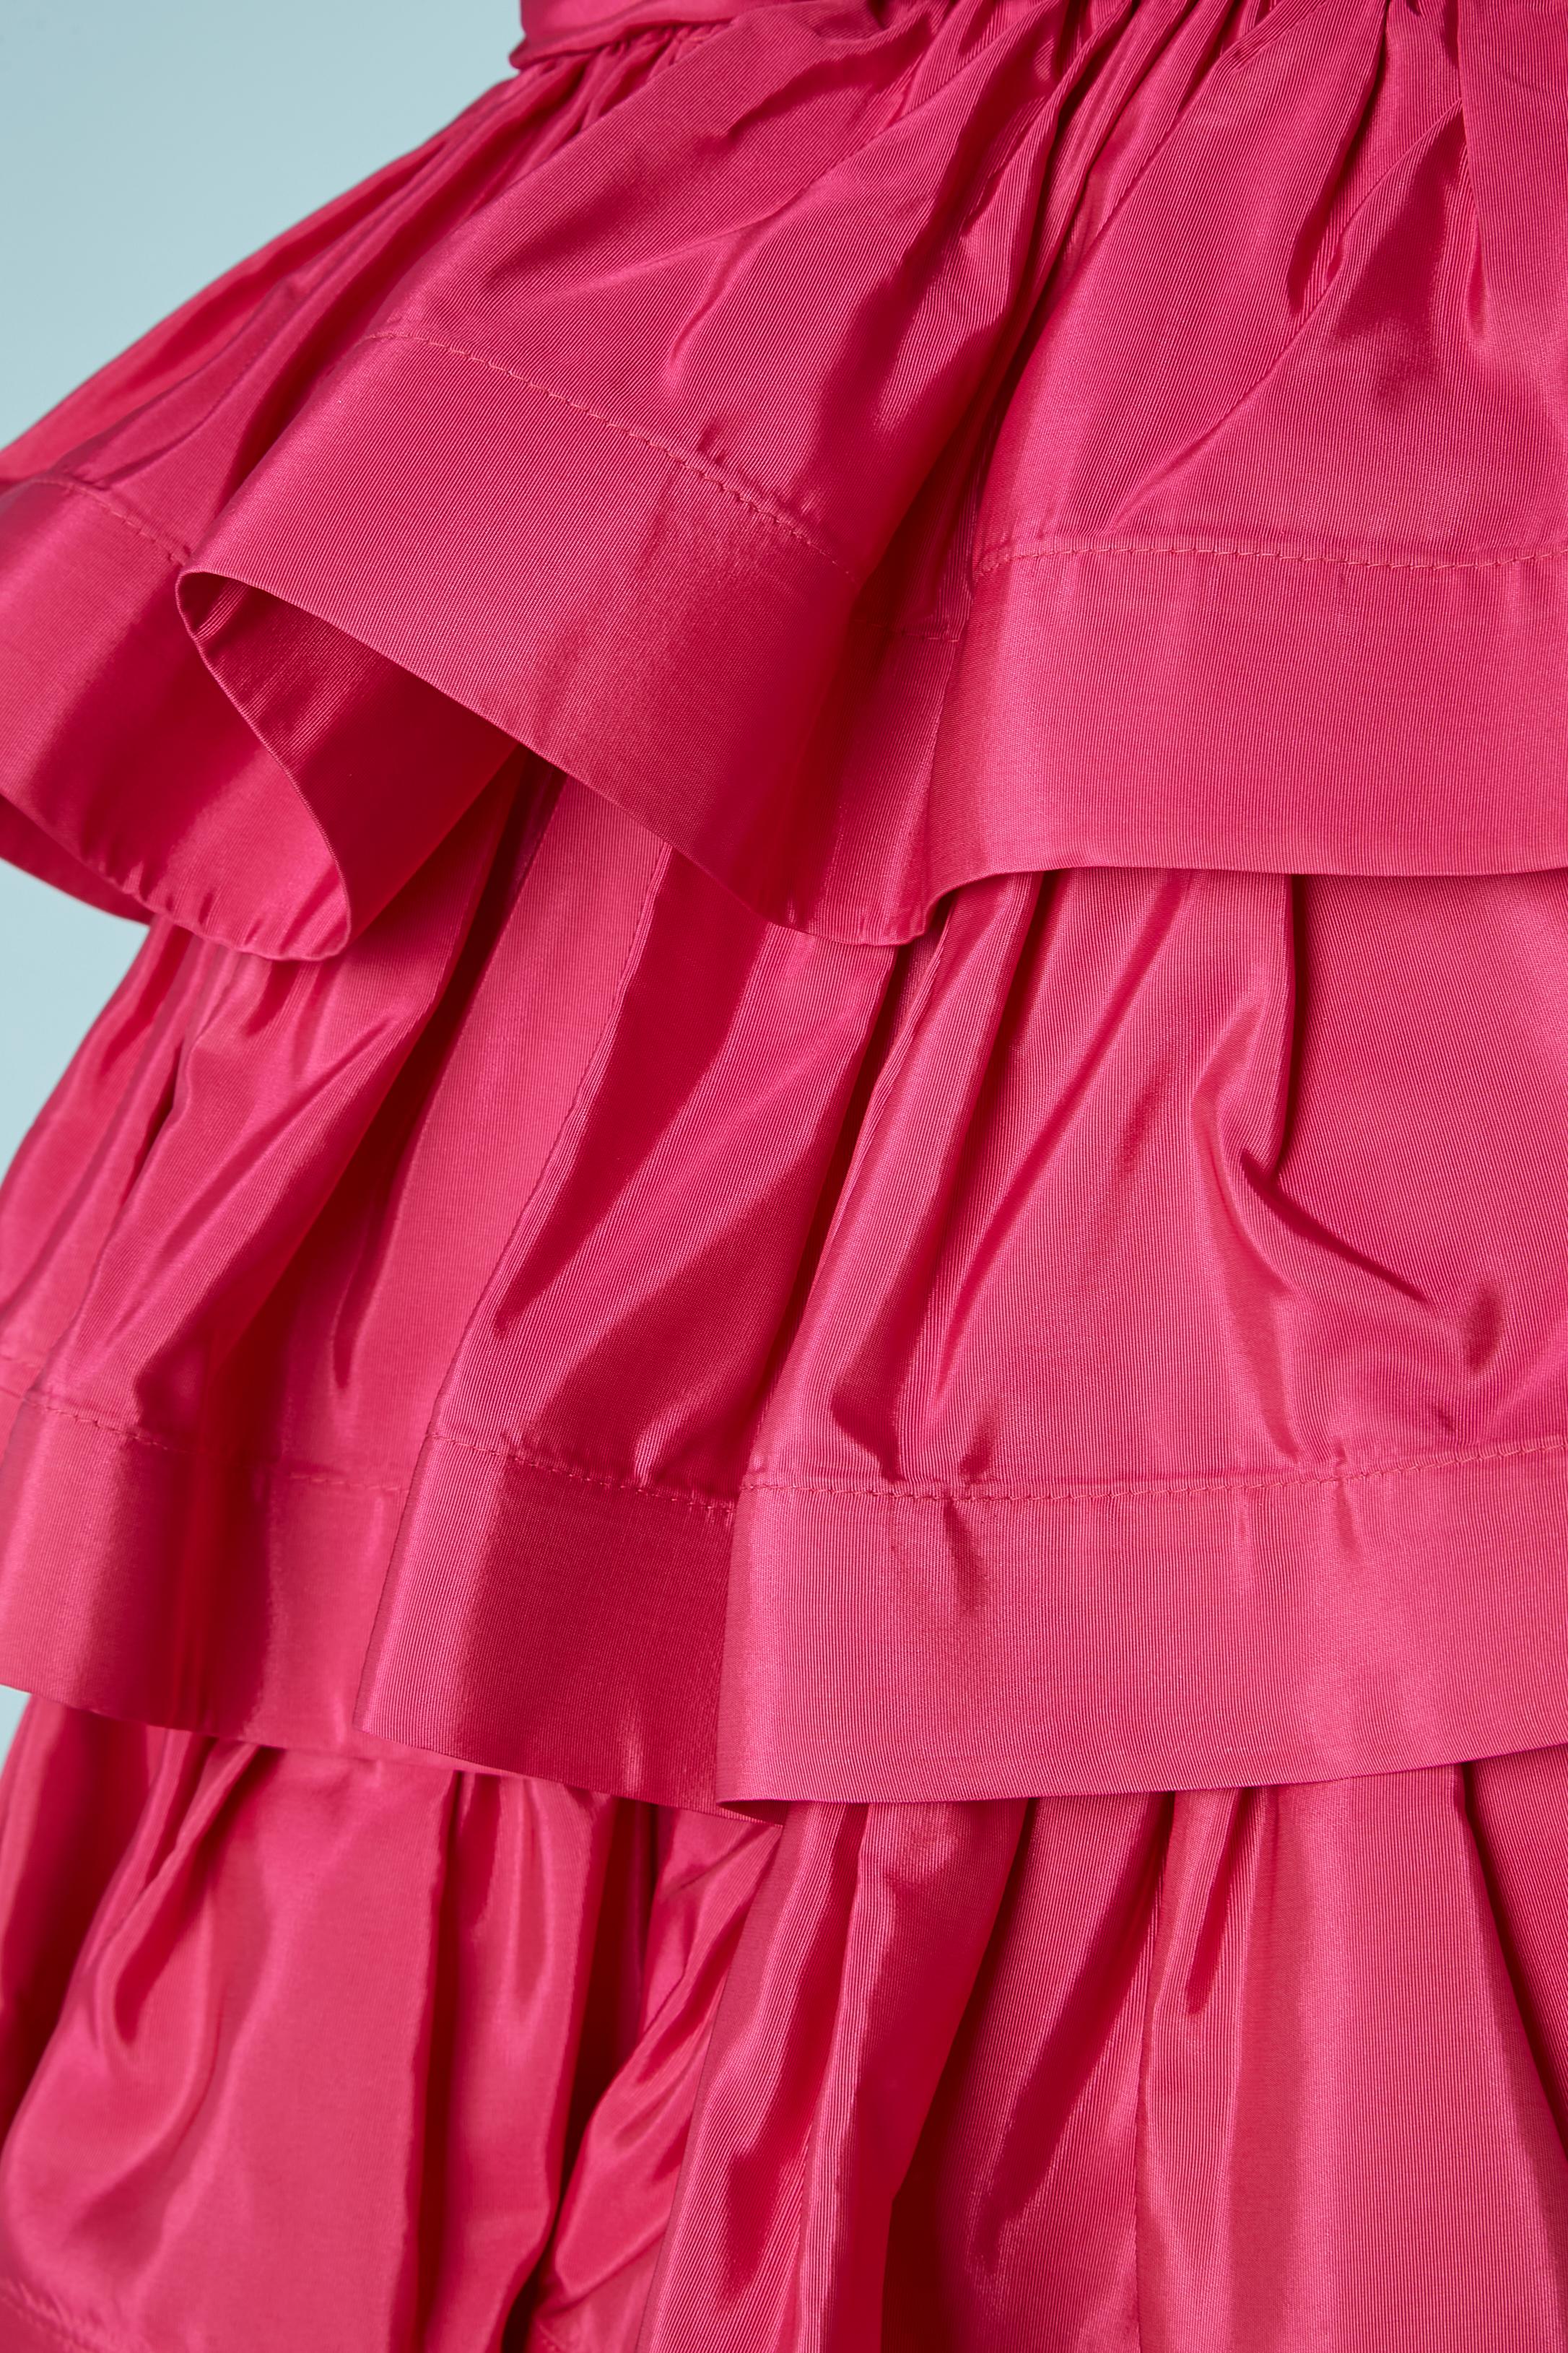 Pink Shocking pink draped cocktail dress with ruffles Lillie Rubin Circa 1980 For Sale